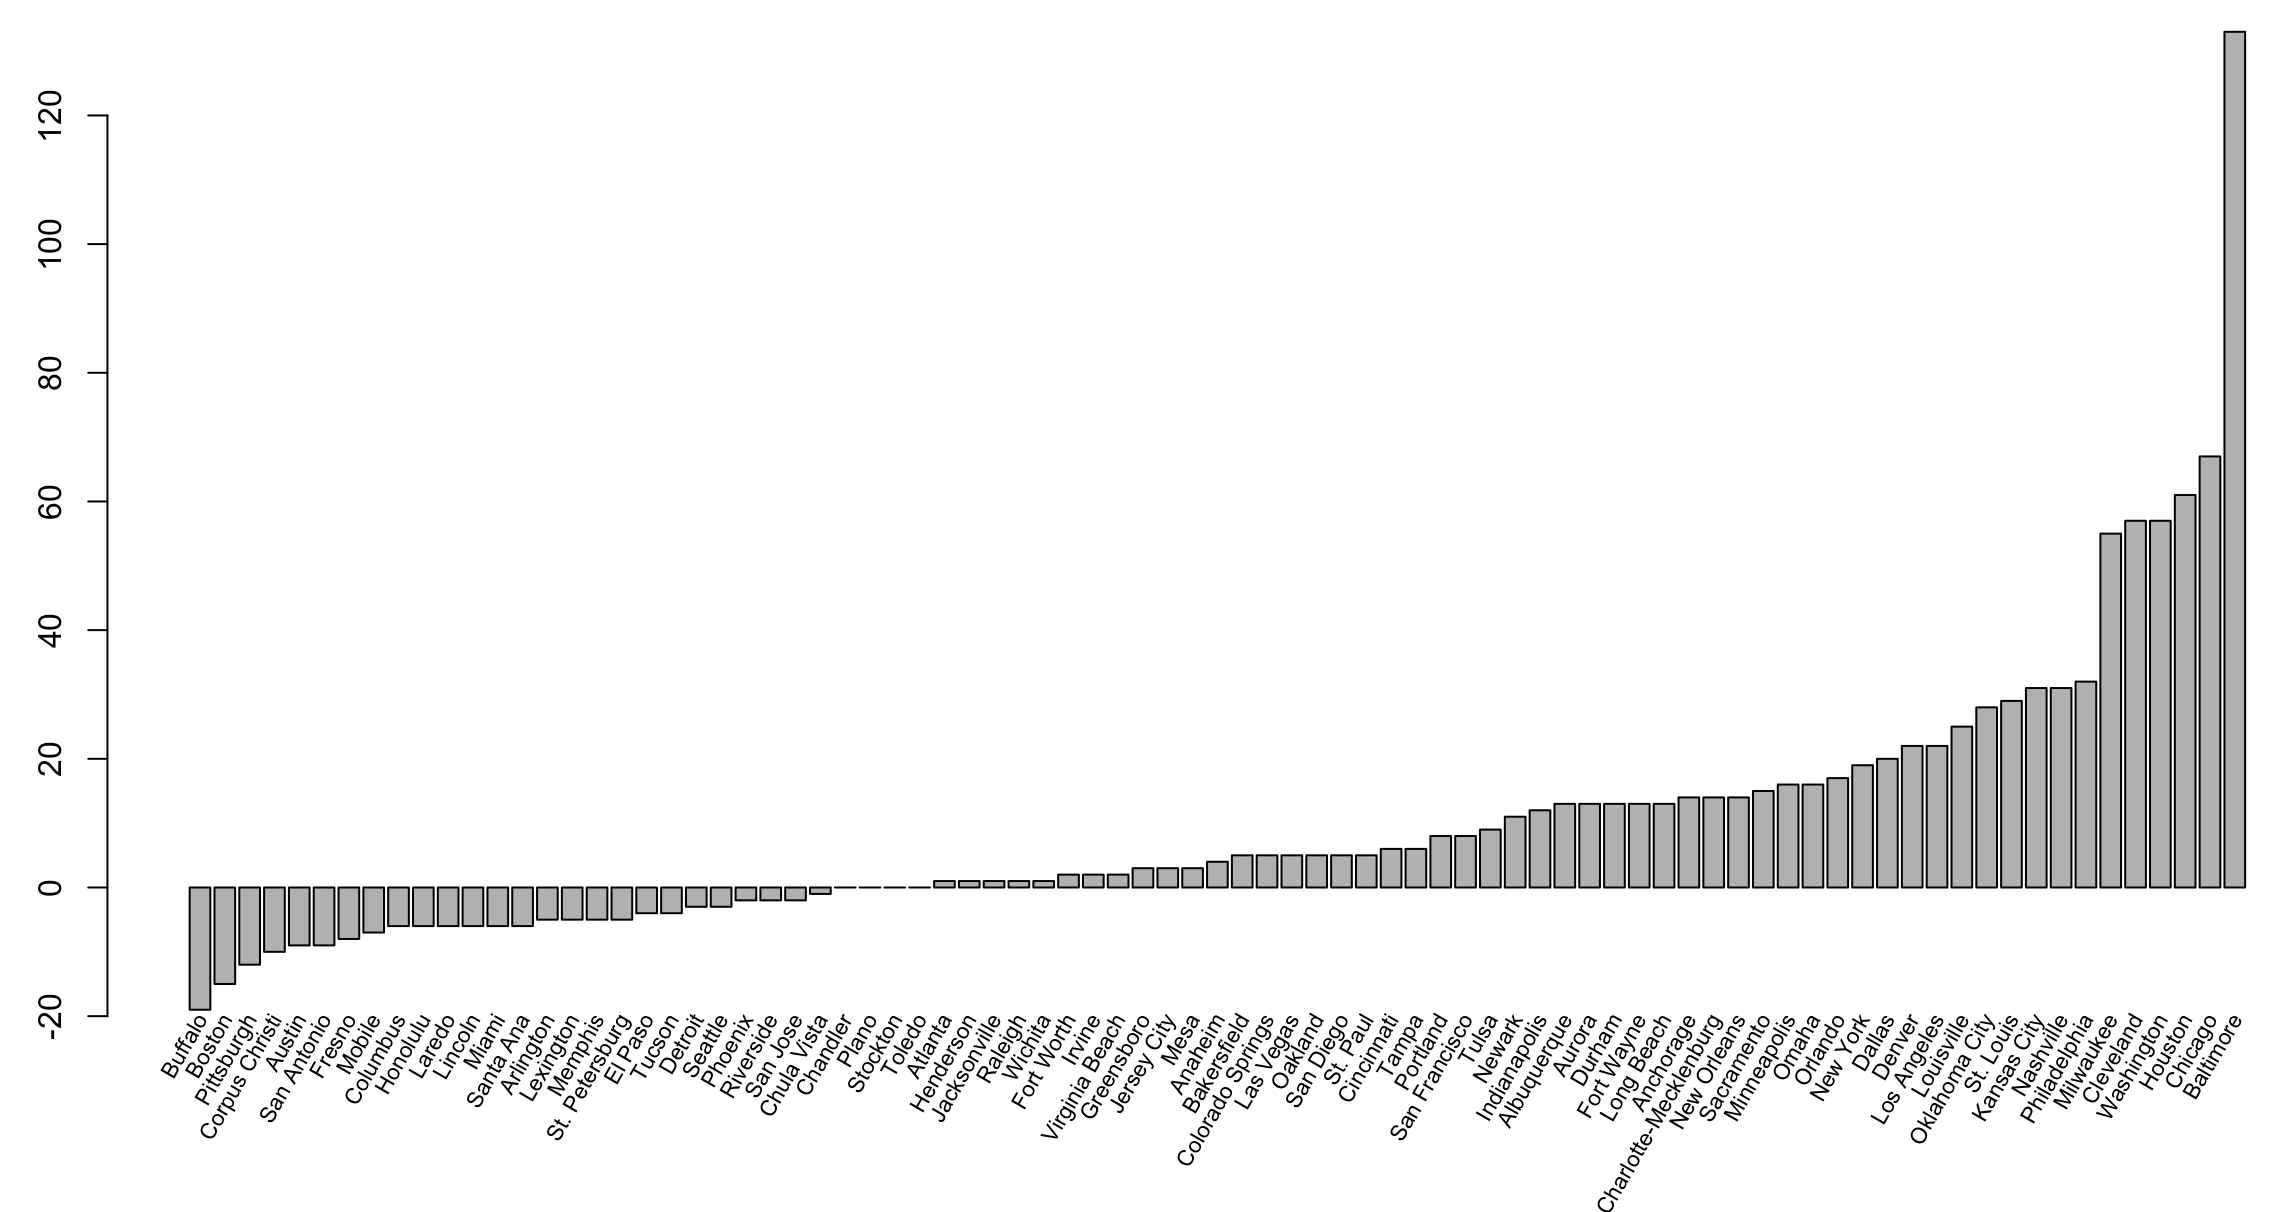 How to create a barplot in R